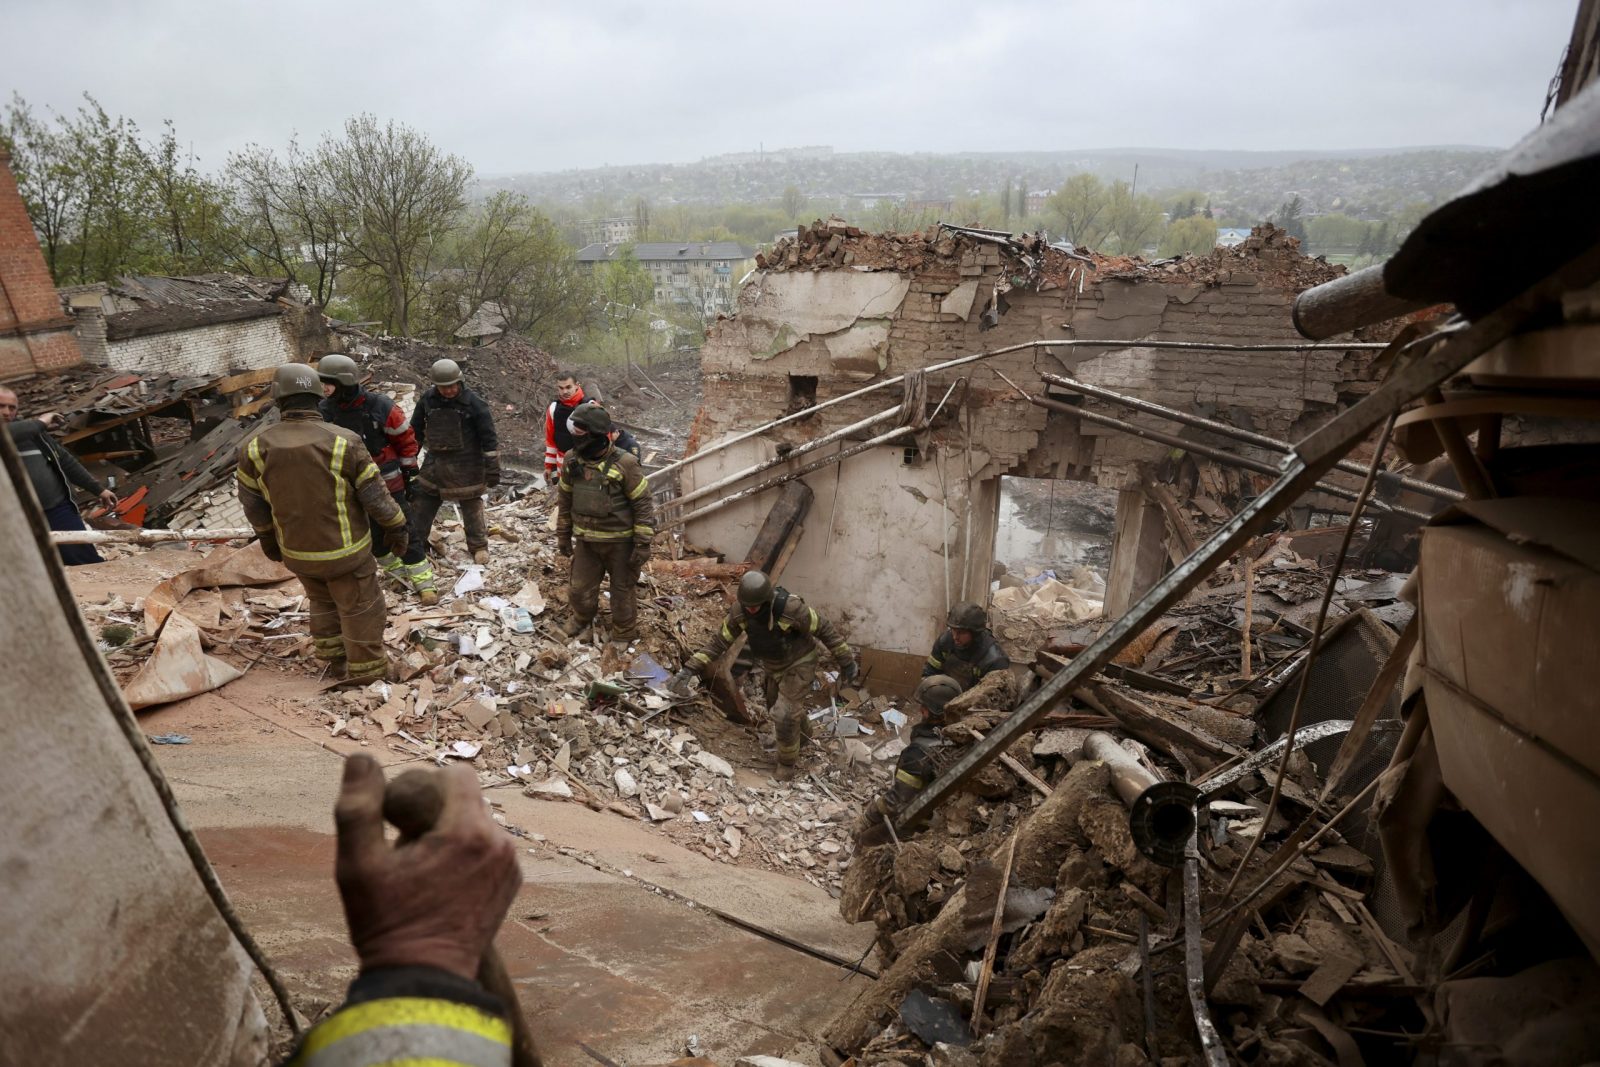 epa10591018 Ukrainian rescuers remove debris after a rocket attack on the local history museum in the city of Kupiansk, Kharkiv region, northeastern Ukraine, 25 April 2023, amid Russia's invasion. At least two persons were killed and 10 others injured in the attack, the State Emergency Service of Ukraine reported. Russian troops entered Ukrainian territory in February 2022, starting a conflict that has provoked destruction and a humanitarian crisis.  EPA/STRINGER